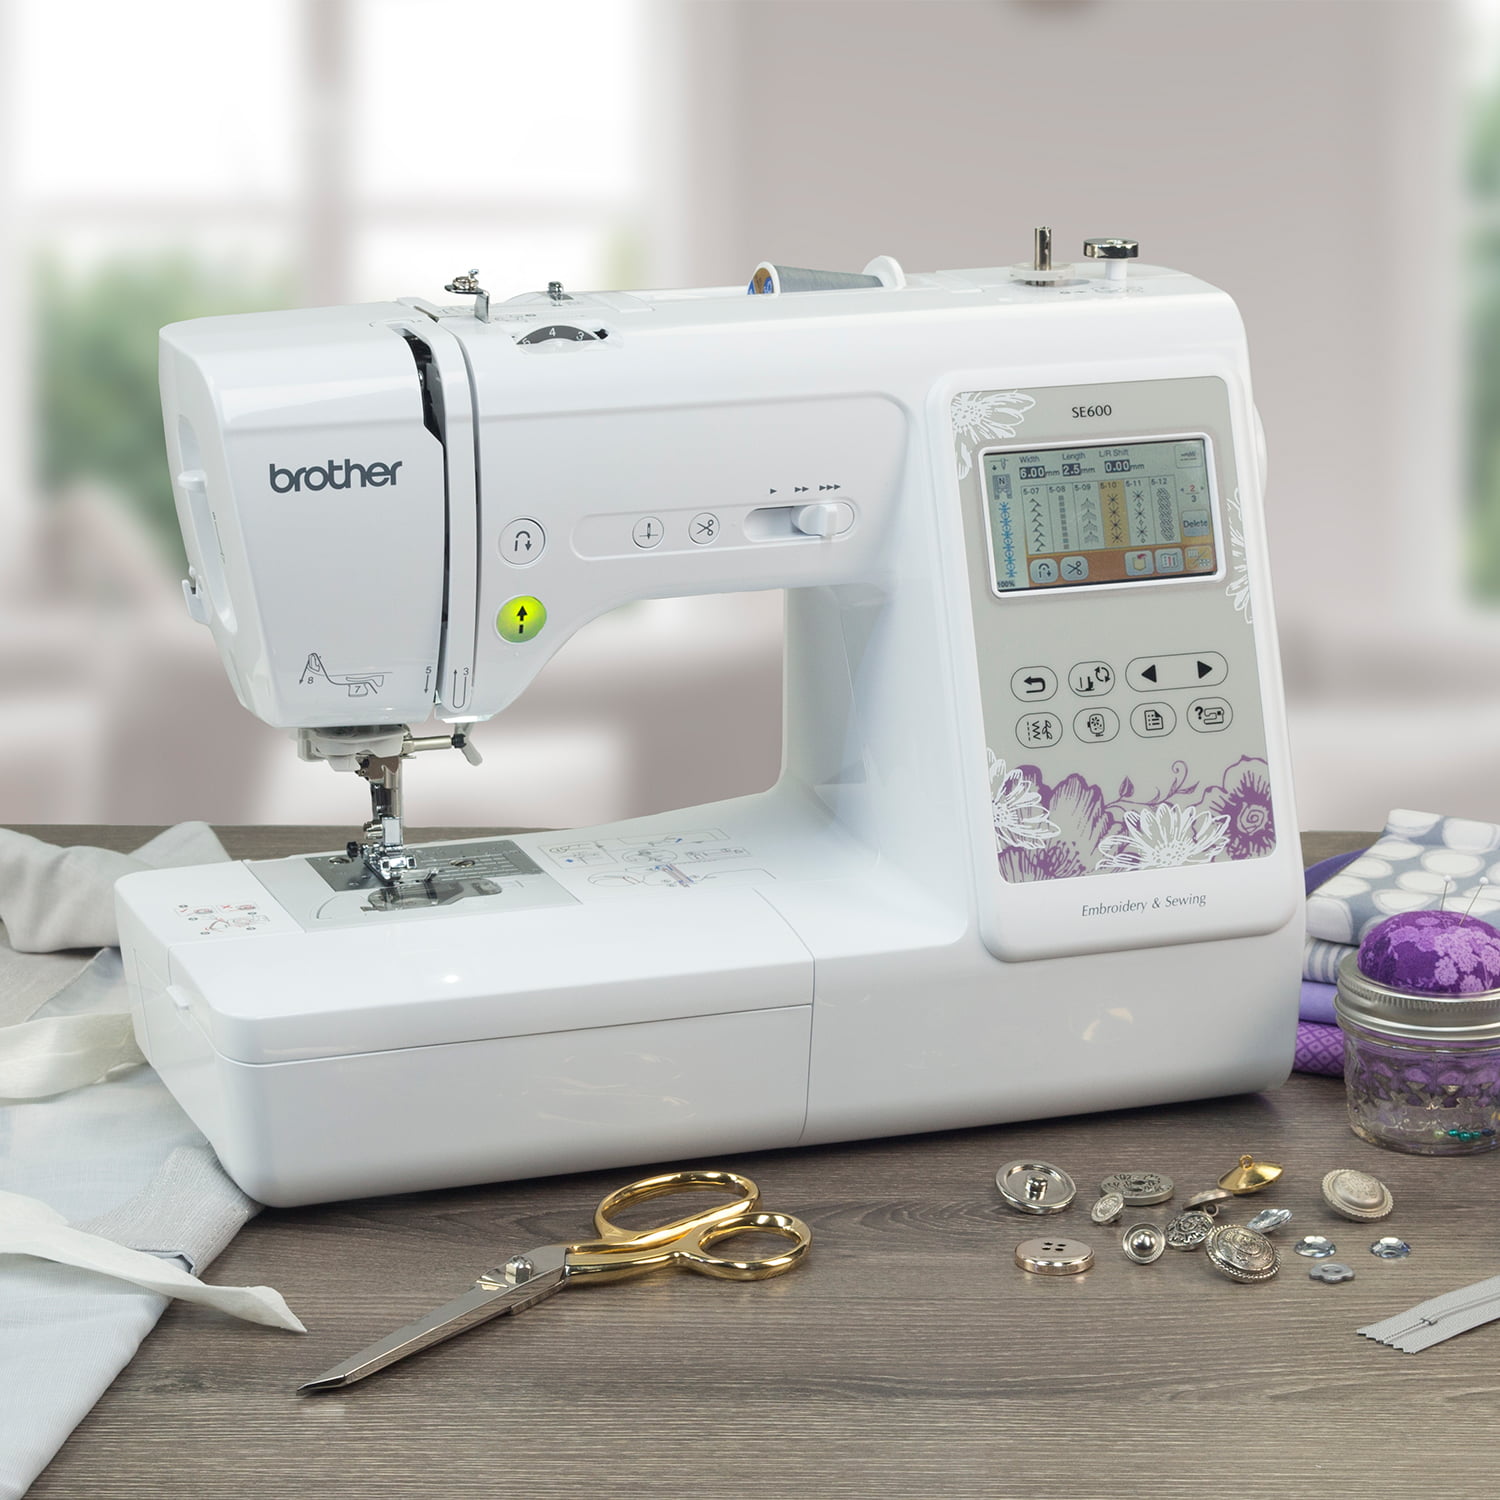 Sewing Starter Kit - 26 Gutermann Sewing Thread 100m Spools and Brother  ST371HD Sewing Machine